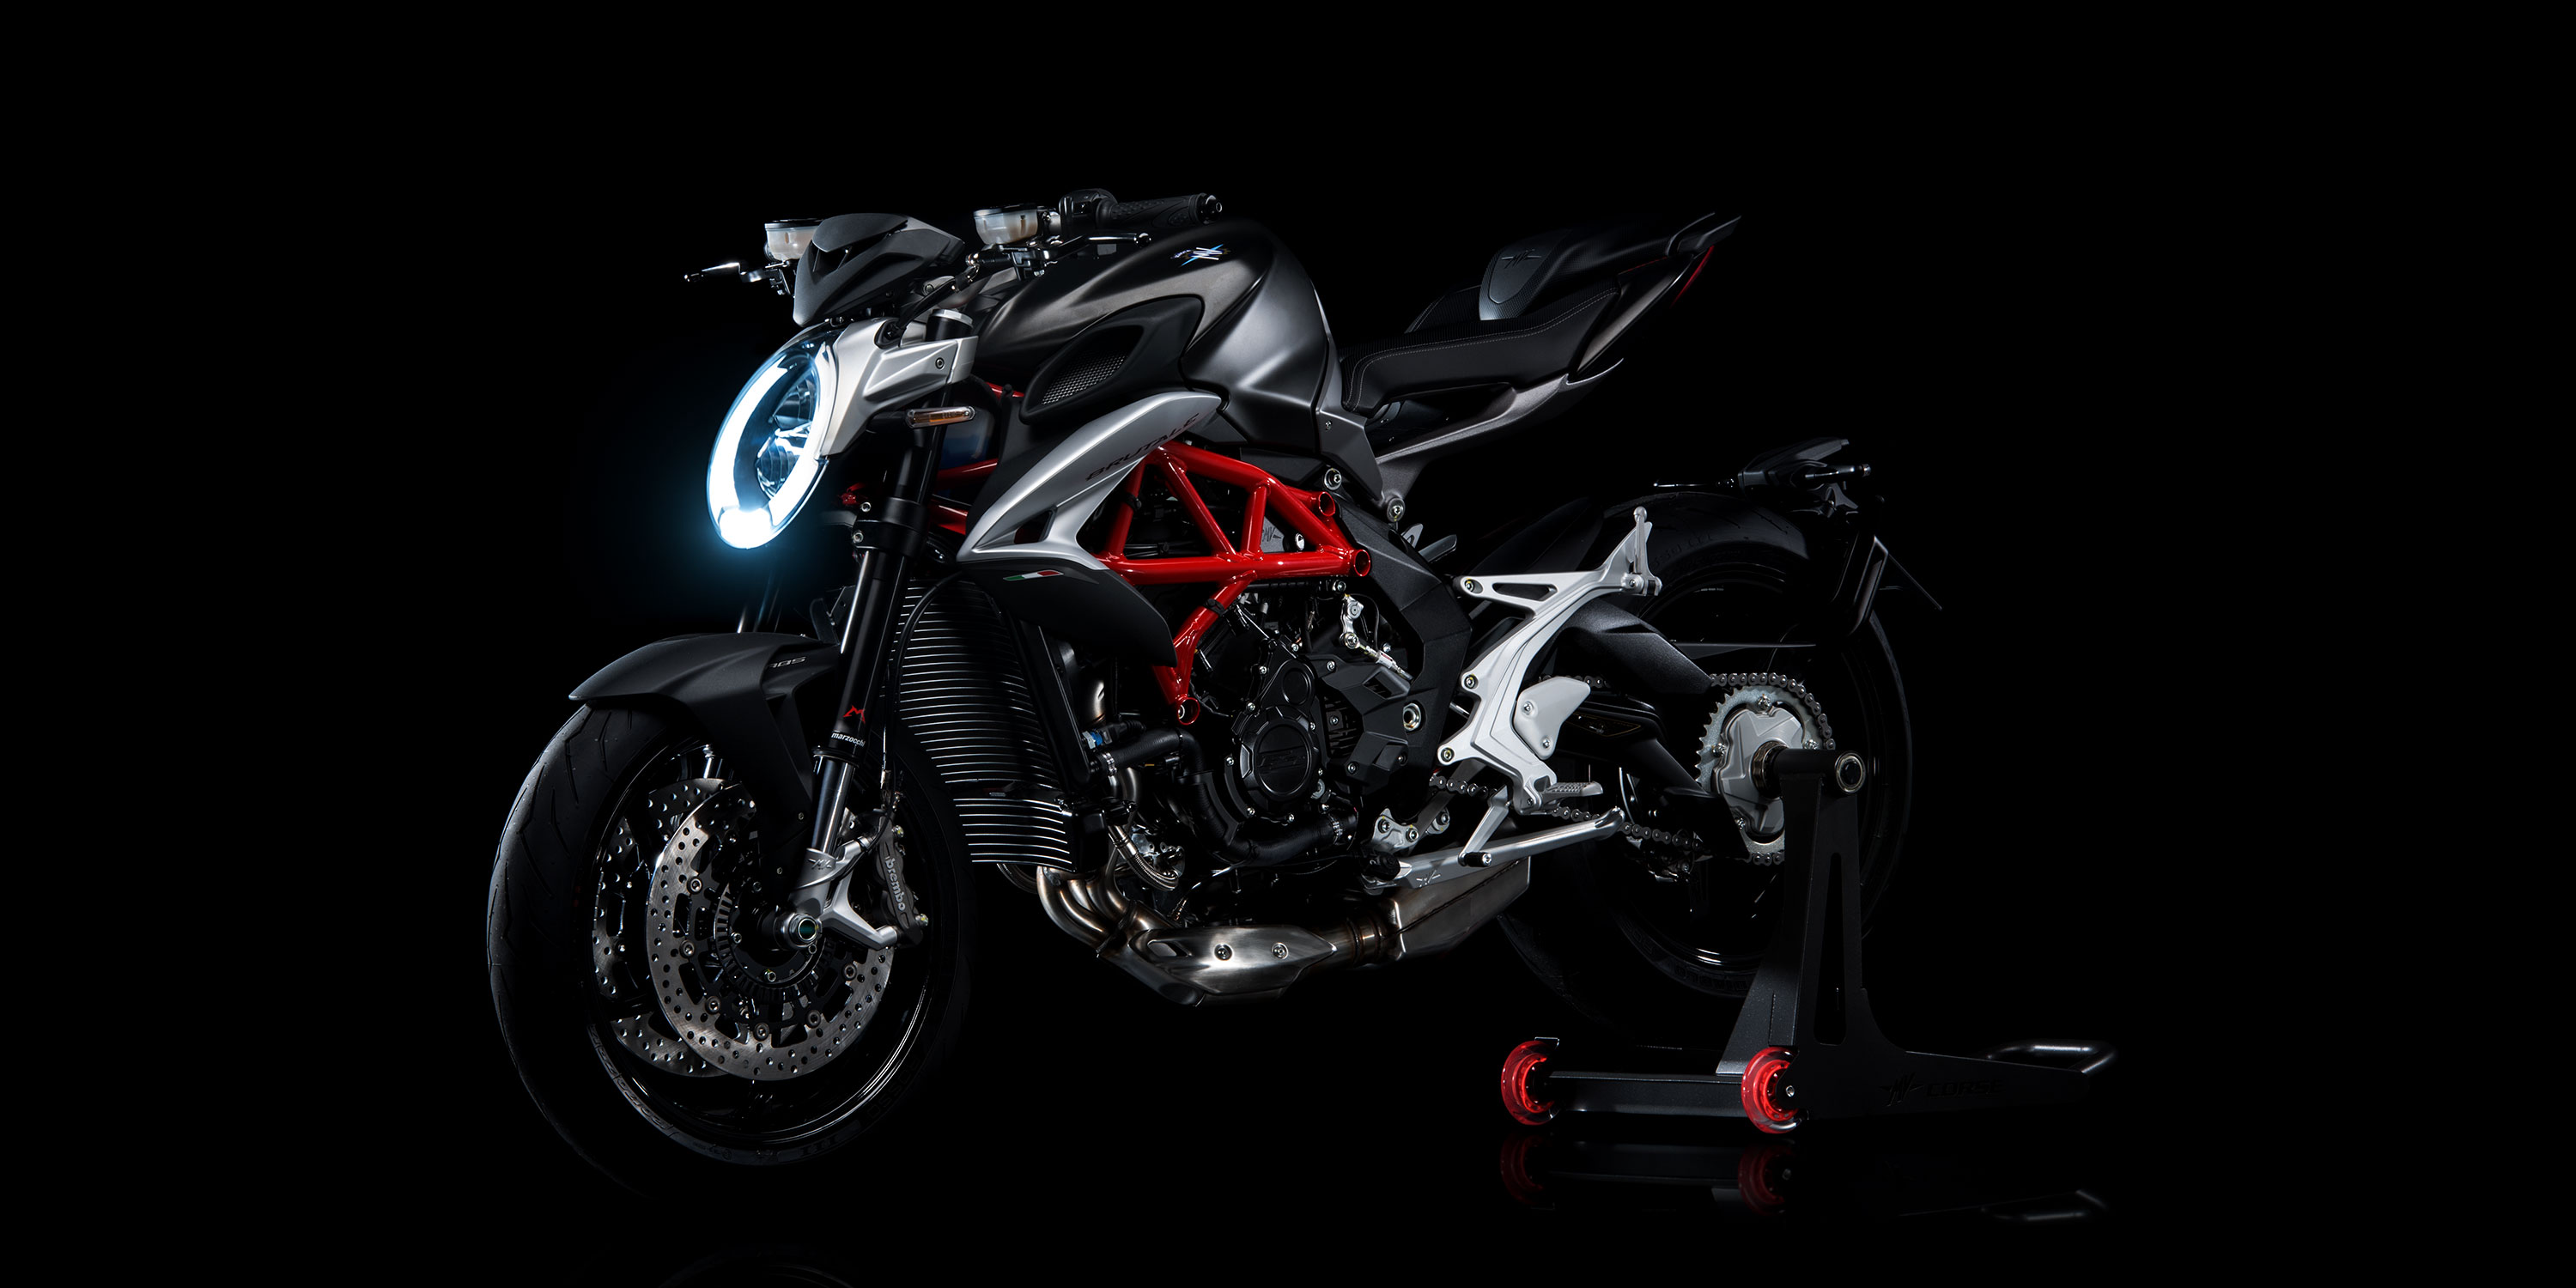 HQ Agusta Brutale 800 Wallpapers | File 326.99Kb